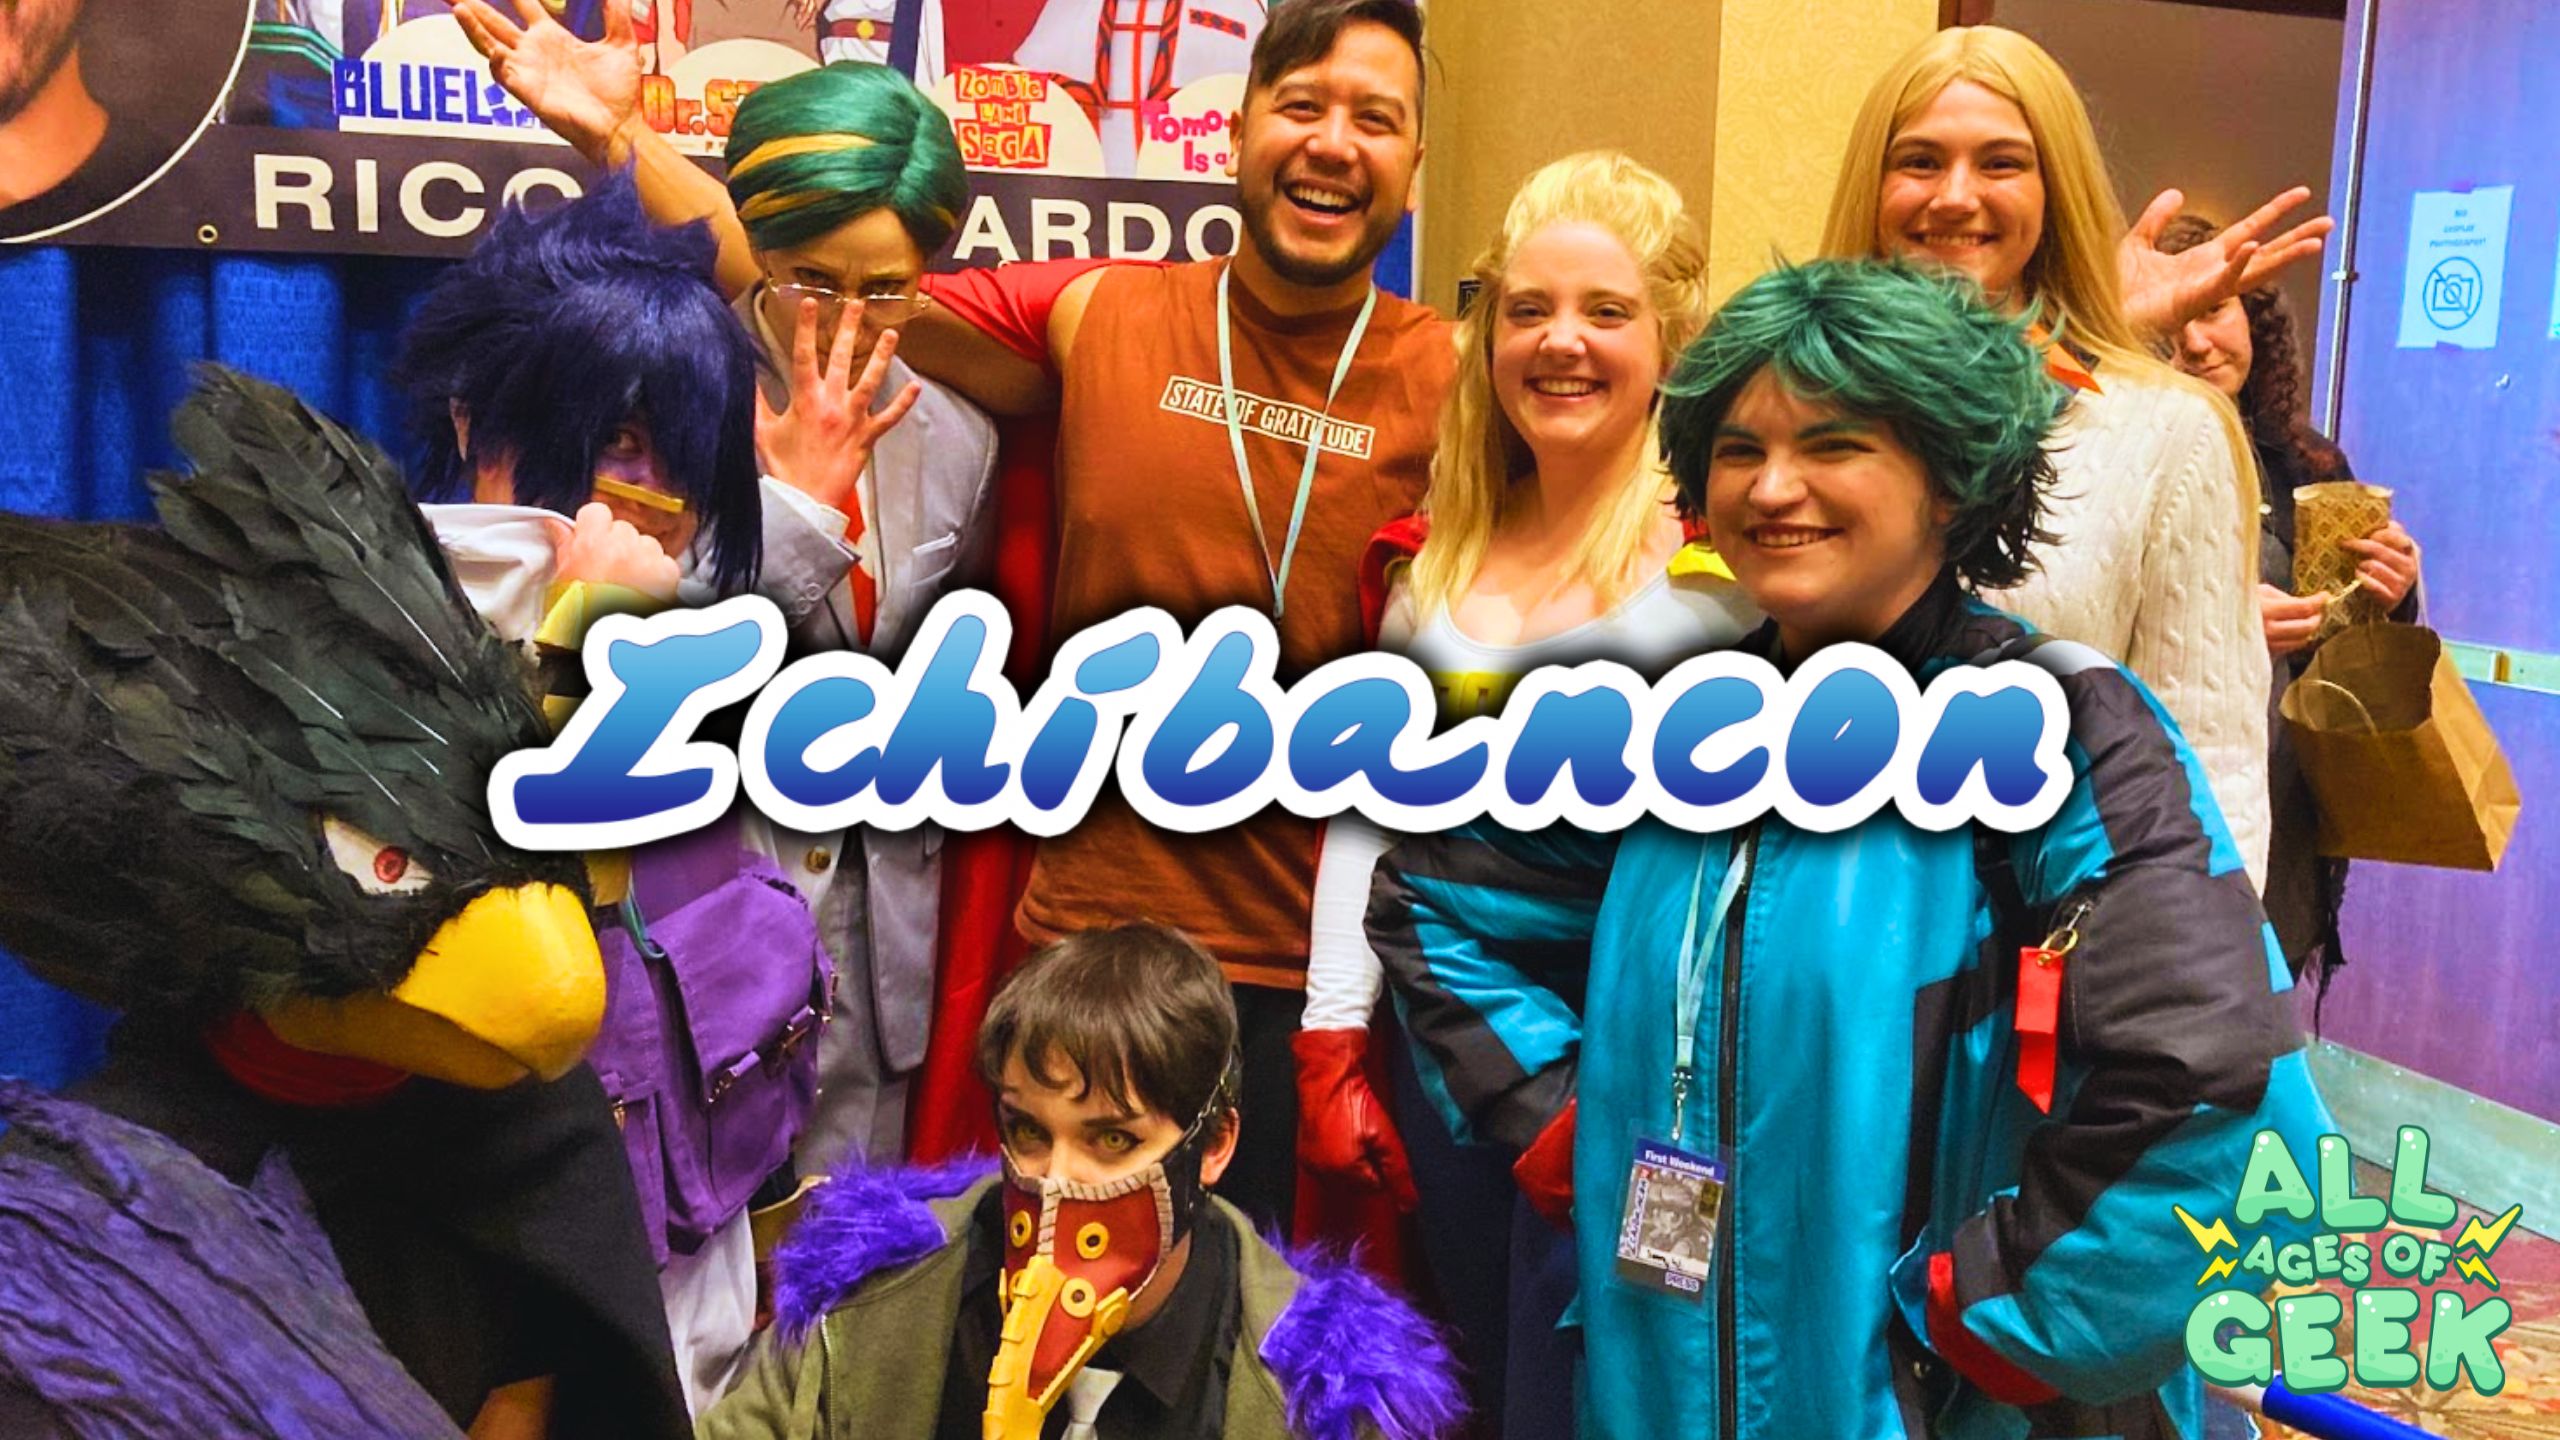 Ichibancon Weekend 1: Full of Cosplay, Community, and Care!